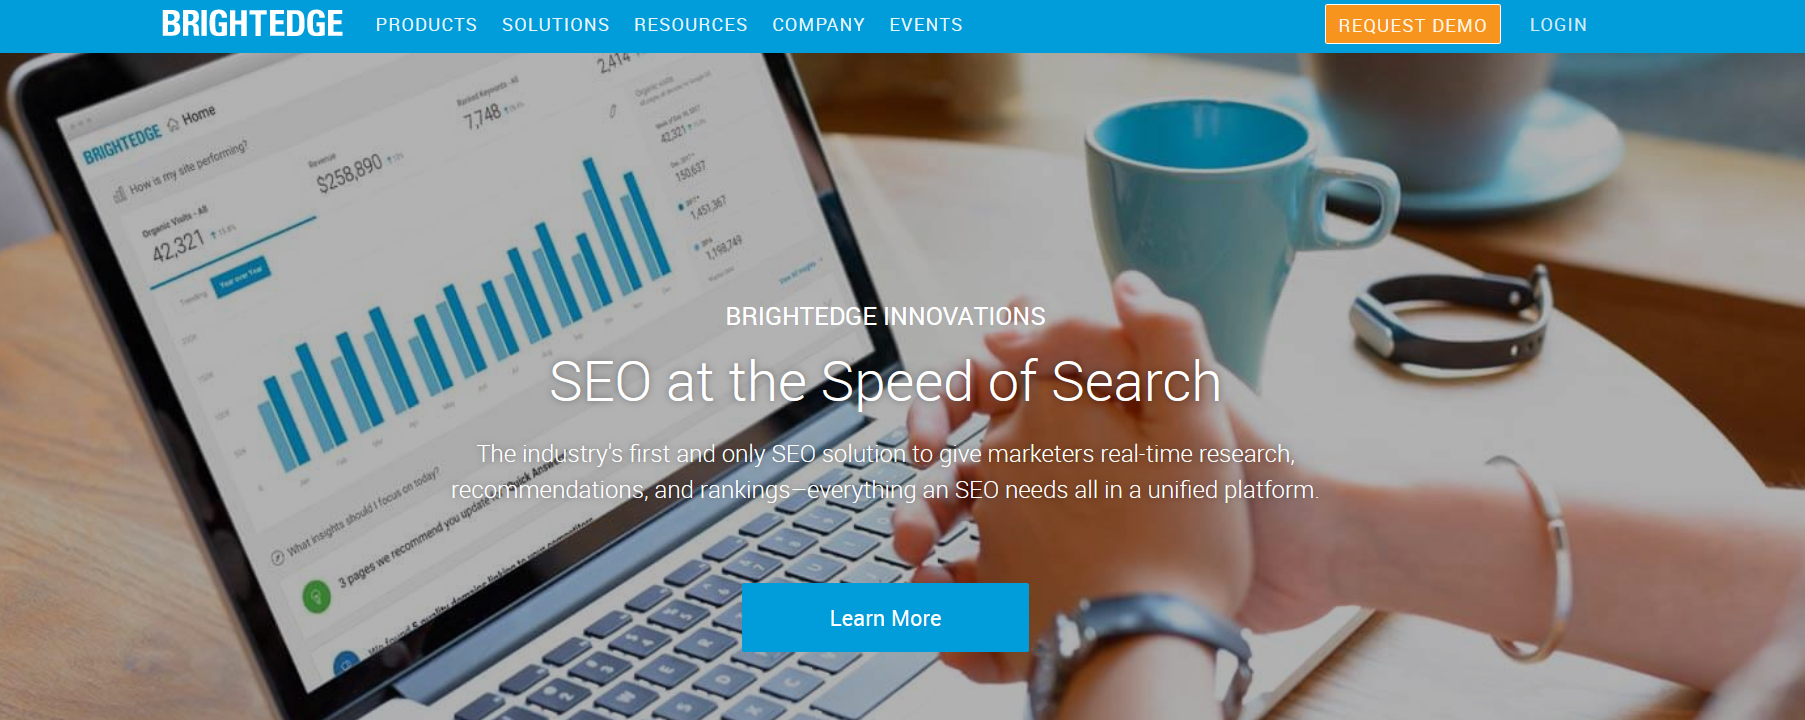 Brightedge - Best for monitoring search engine rankings